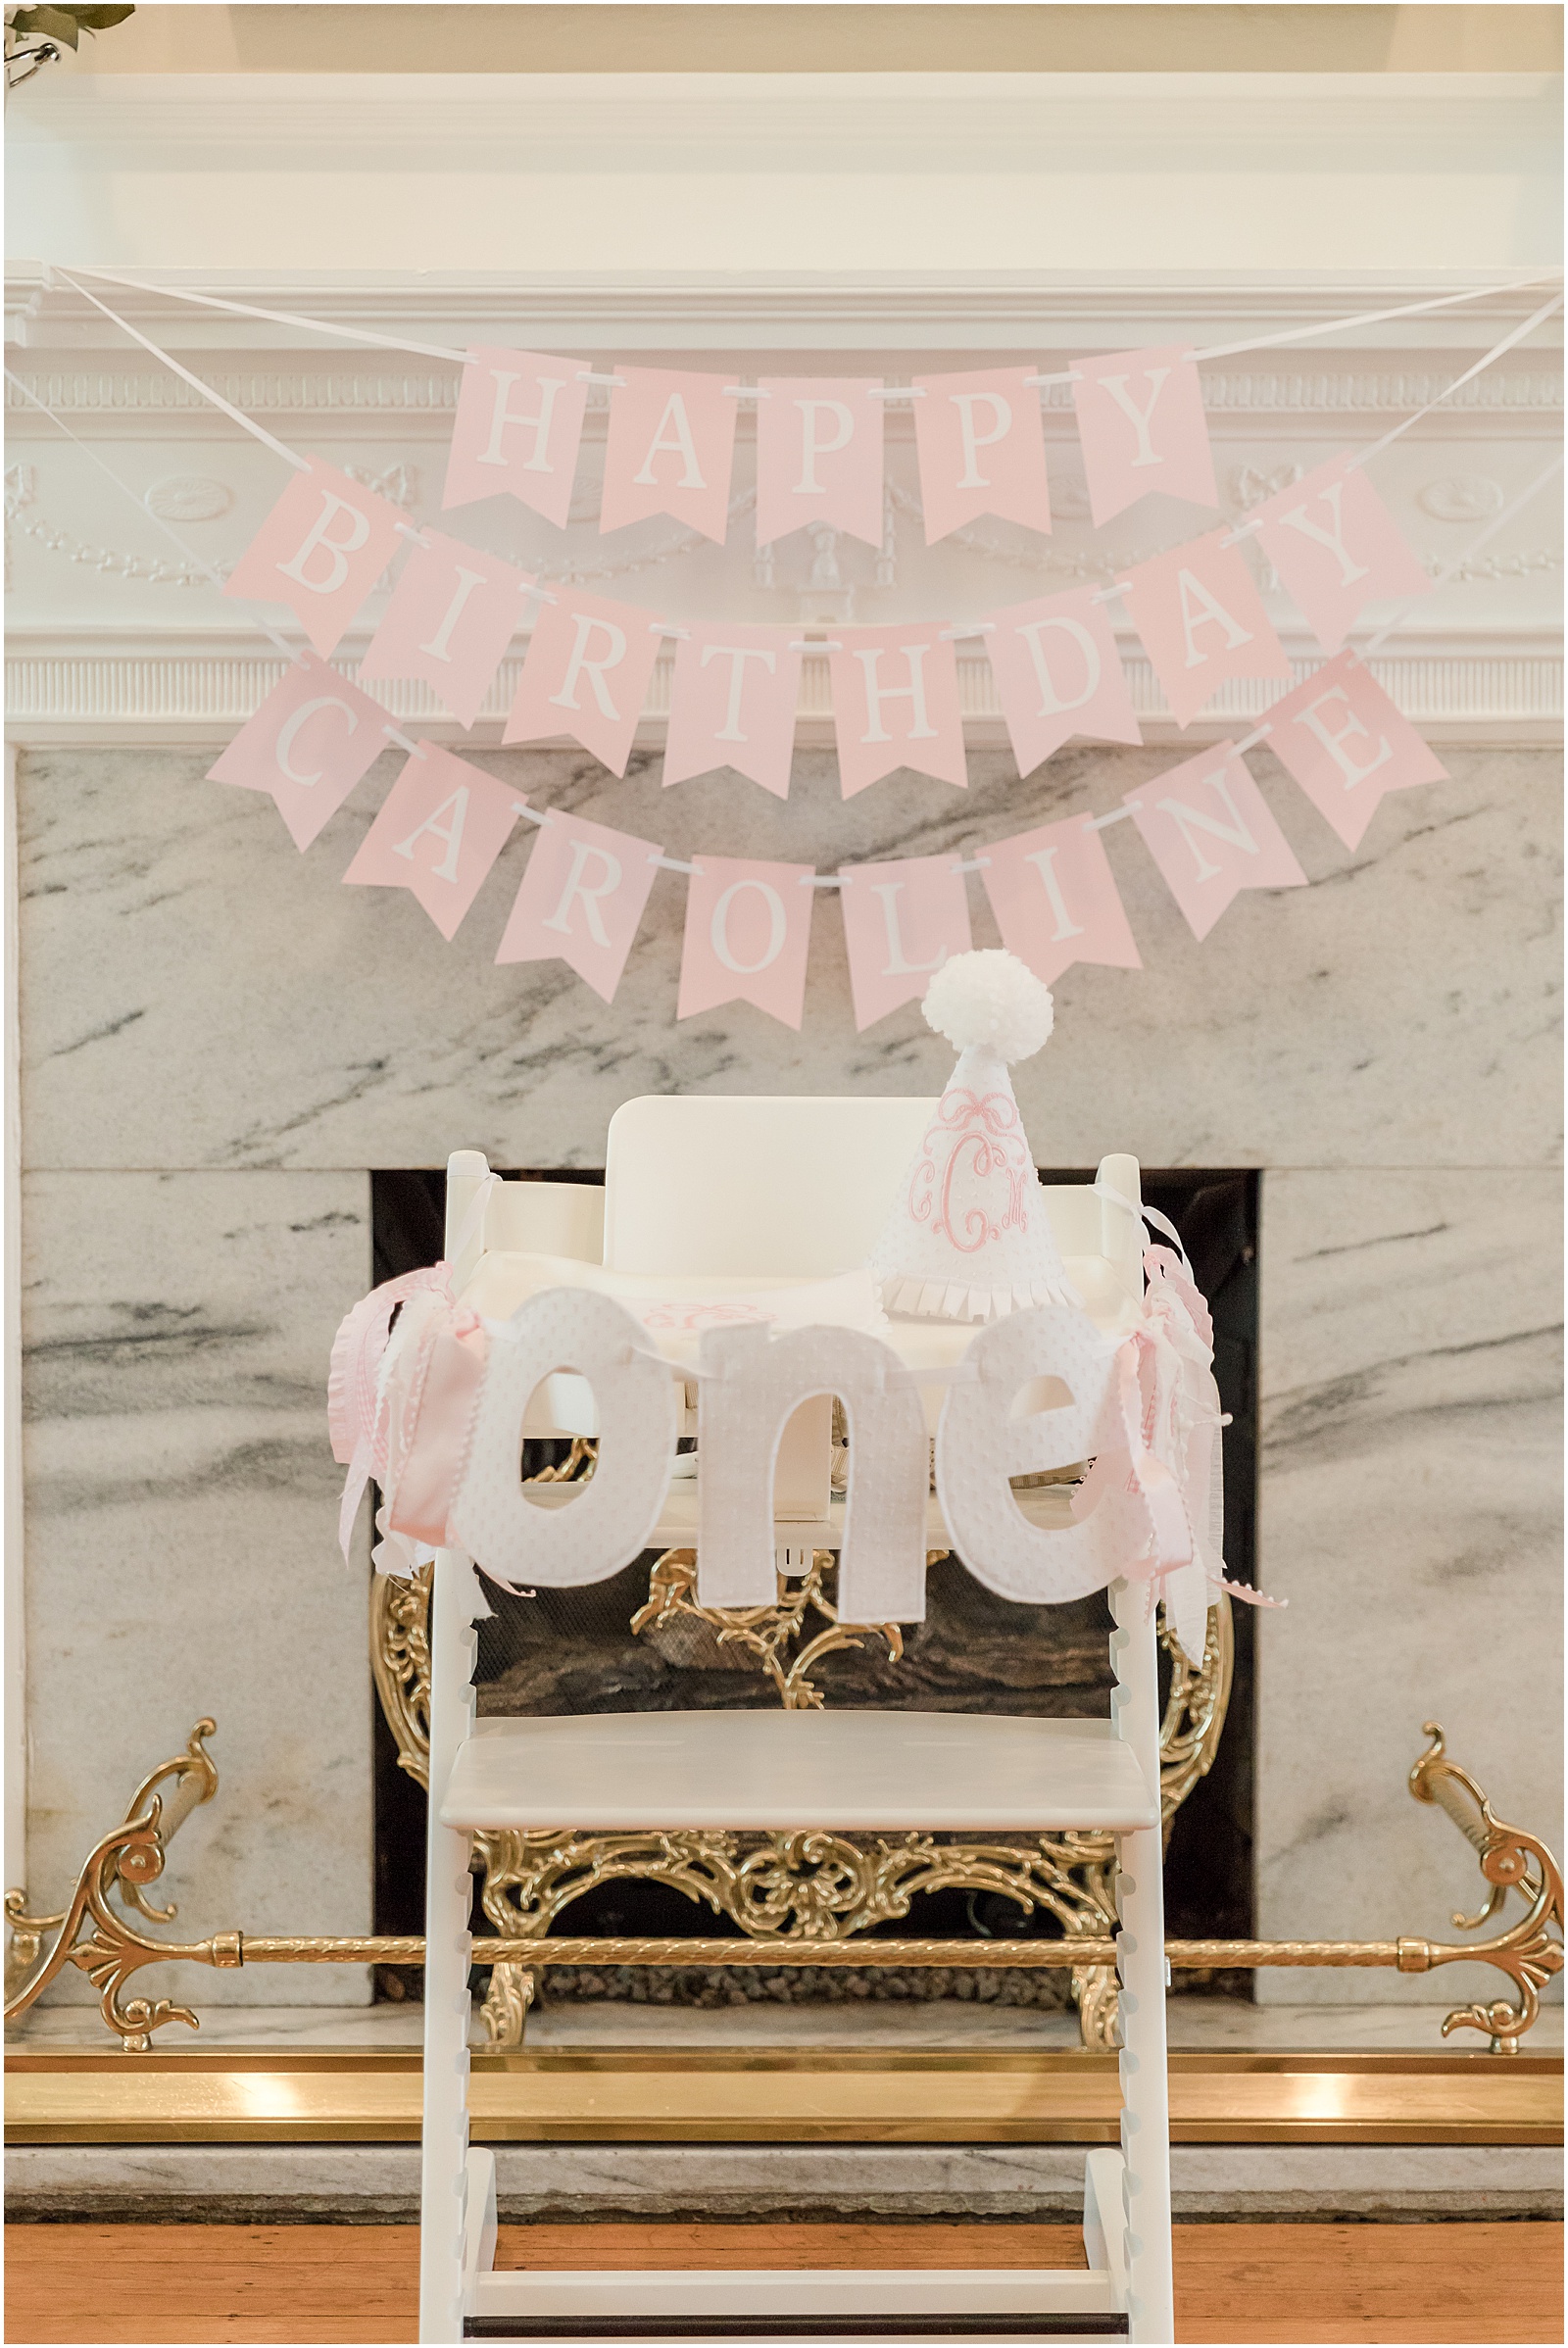 Greenville first birthday photos, Little Happies birthday banner, pink and white birthday party